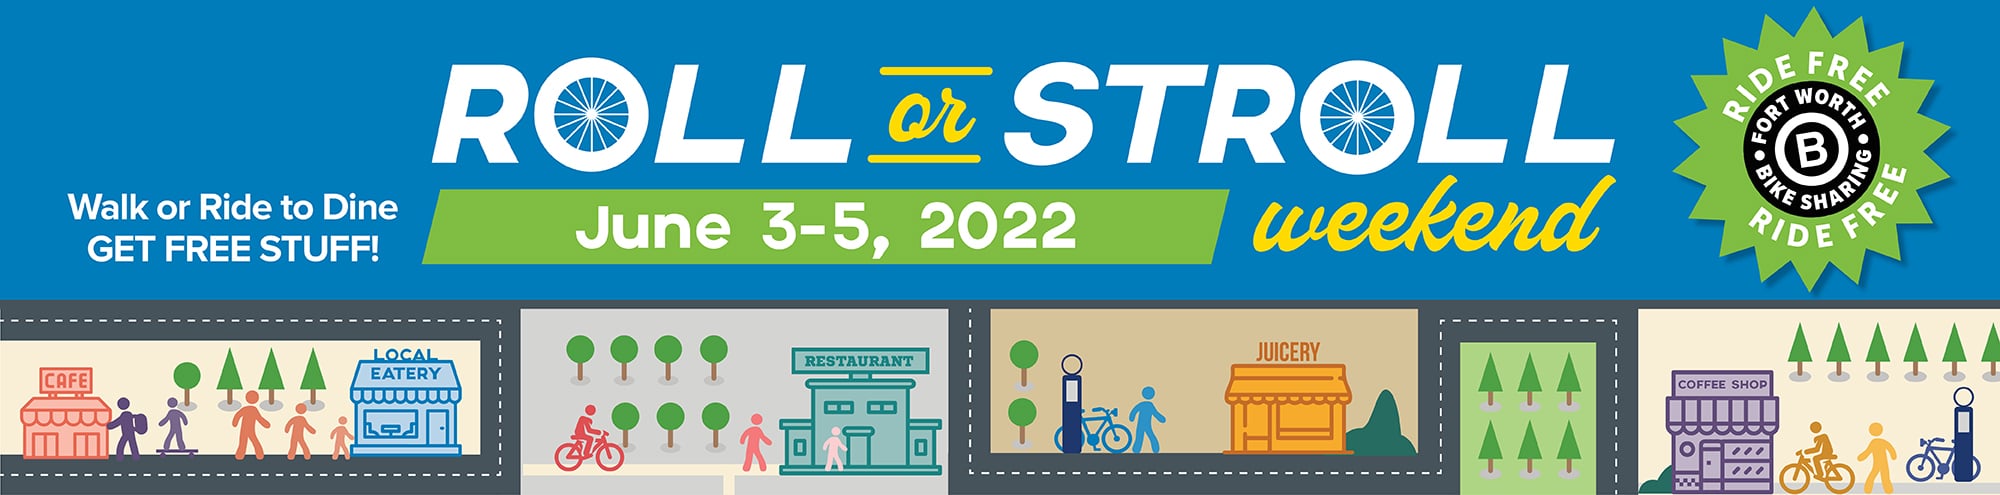 Roll or Stroll weekend - June 3-5, 2022. Walk or ride to dine, get free stuff!